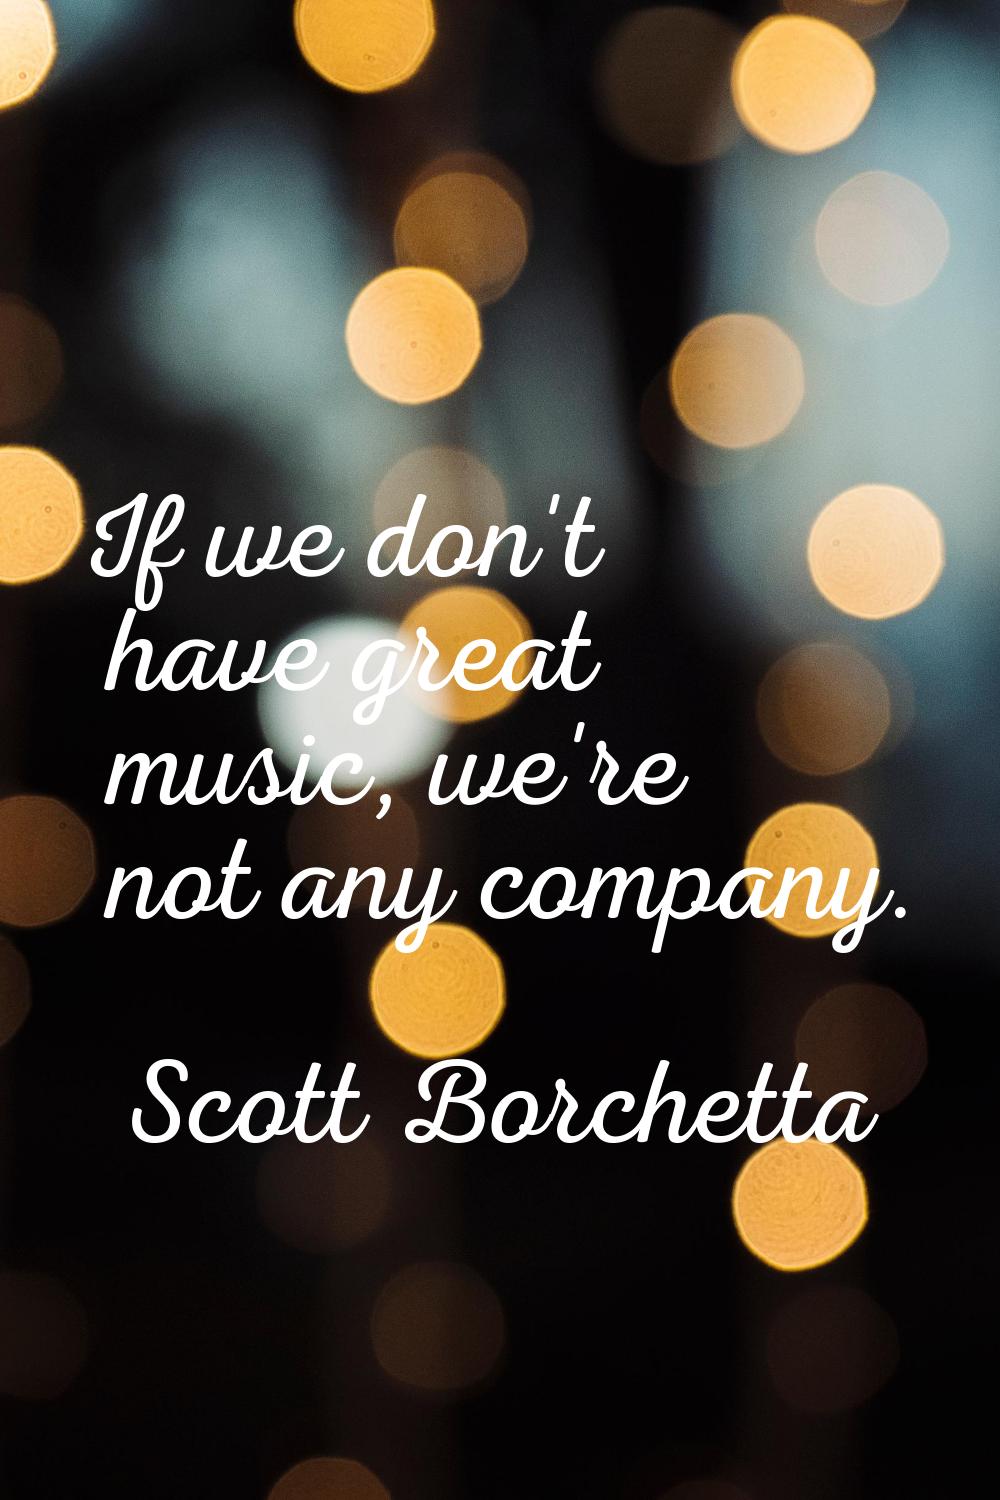 If we don't have great music, we're not any company.